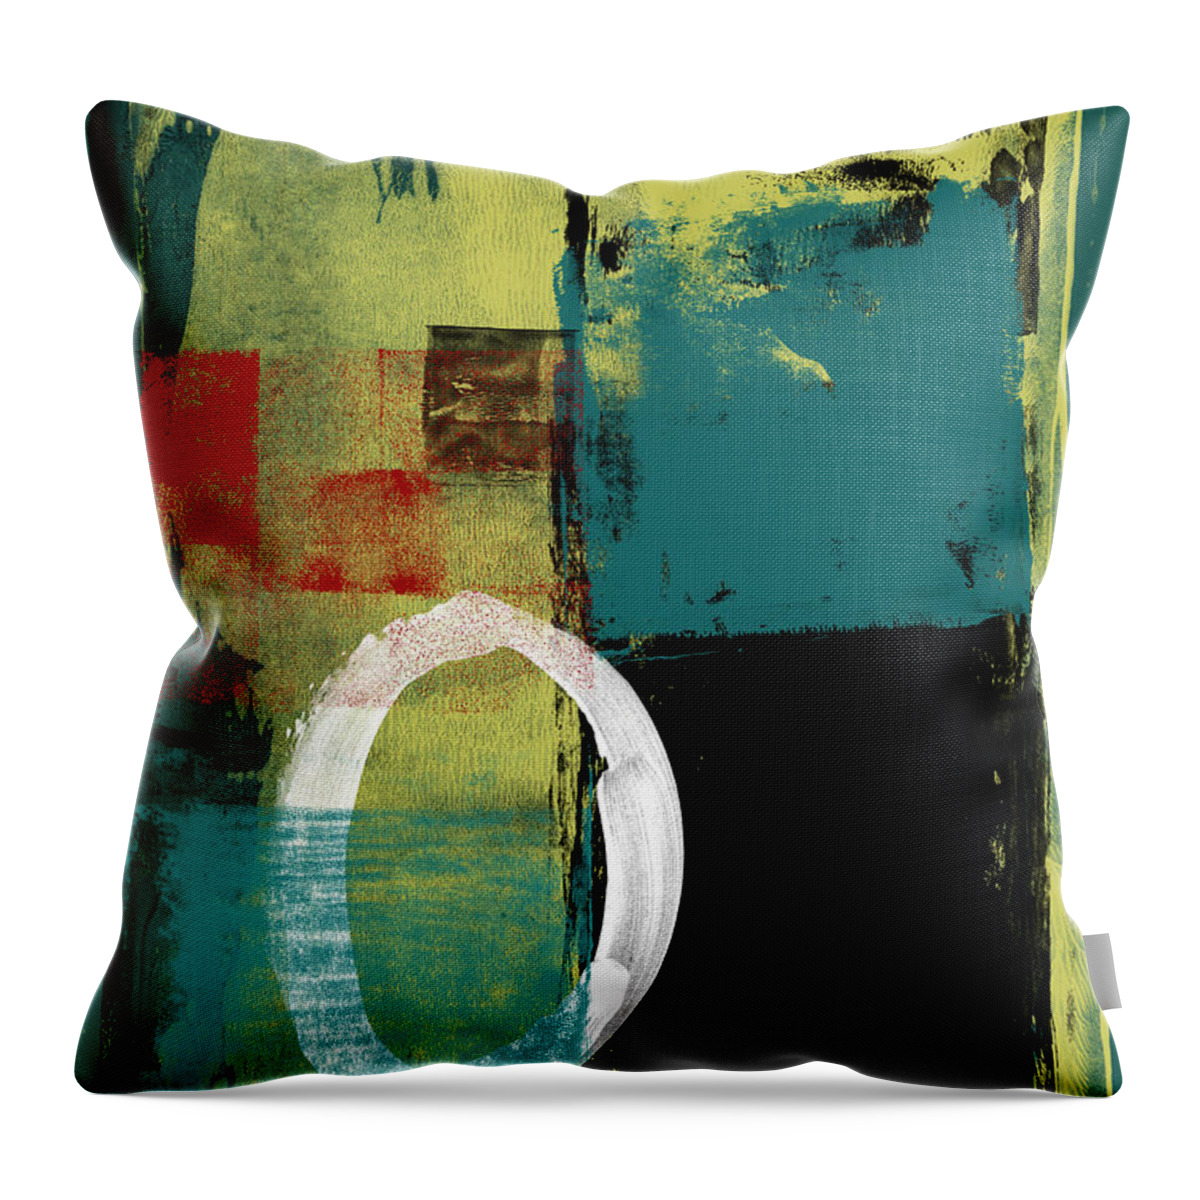 Abstract Throw Pillow featuring the painting Pine Green and Yellow Abstract Study by Naxart Studio